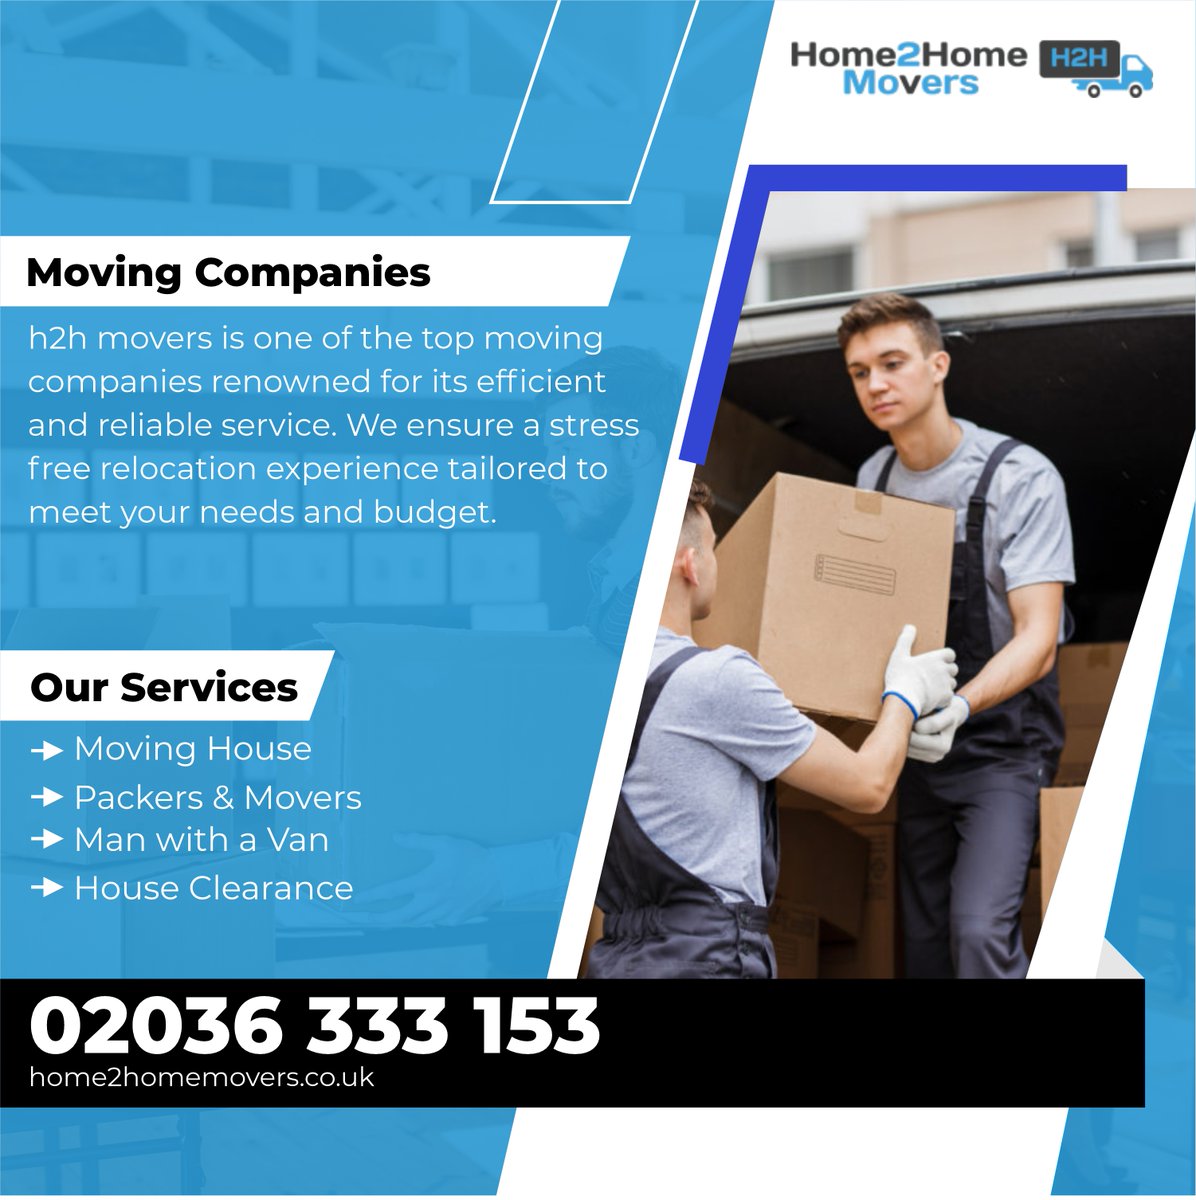 Home 2 Home Movers, nestled on Electric Ave in London, is your go-to choice among moving companies, offering seamless relocations and exceptional service.

home2homemovers.co.uk
#MovingServices
#RelocationExperts
#MovingDay
#ProfessionalMovers
#HomeMoving